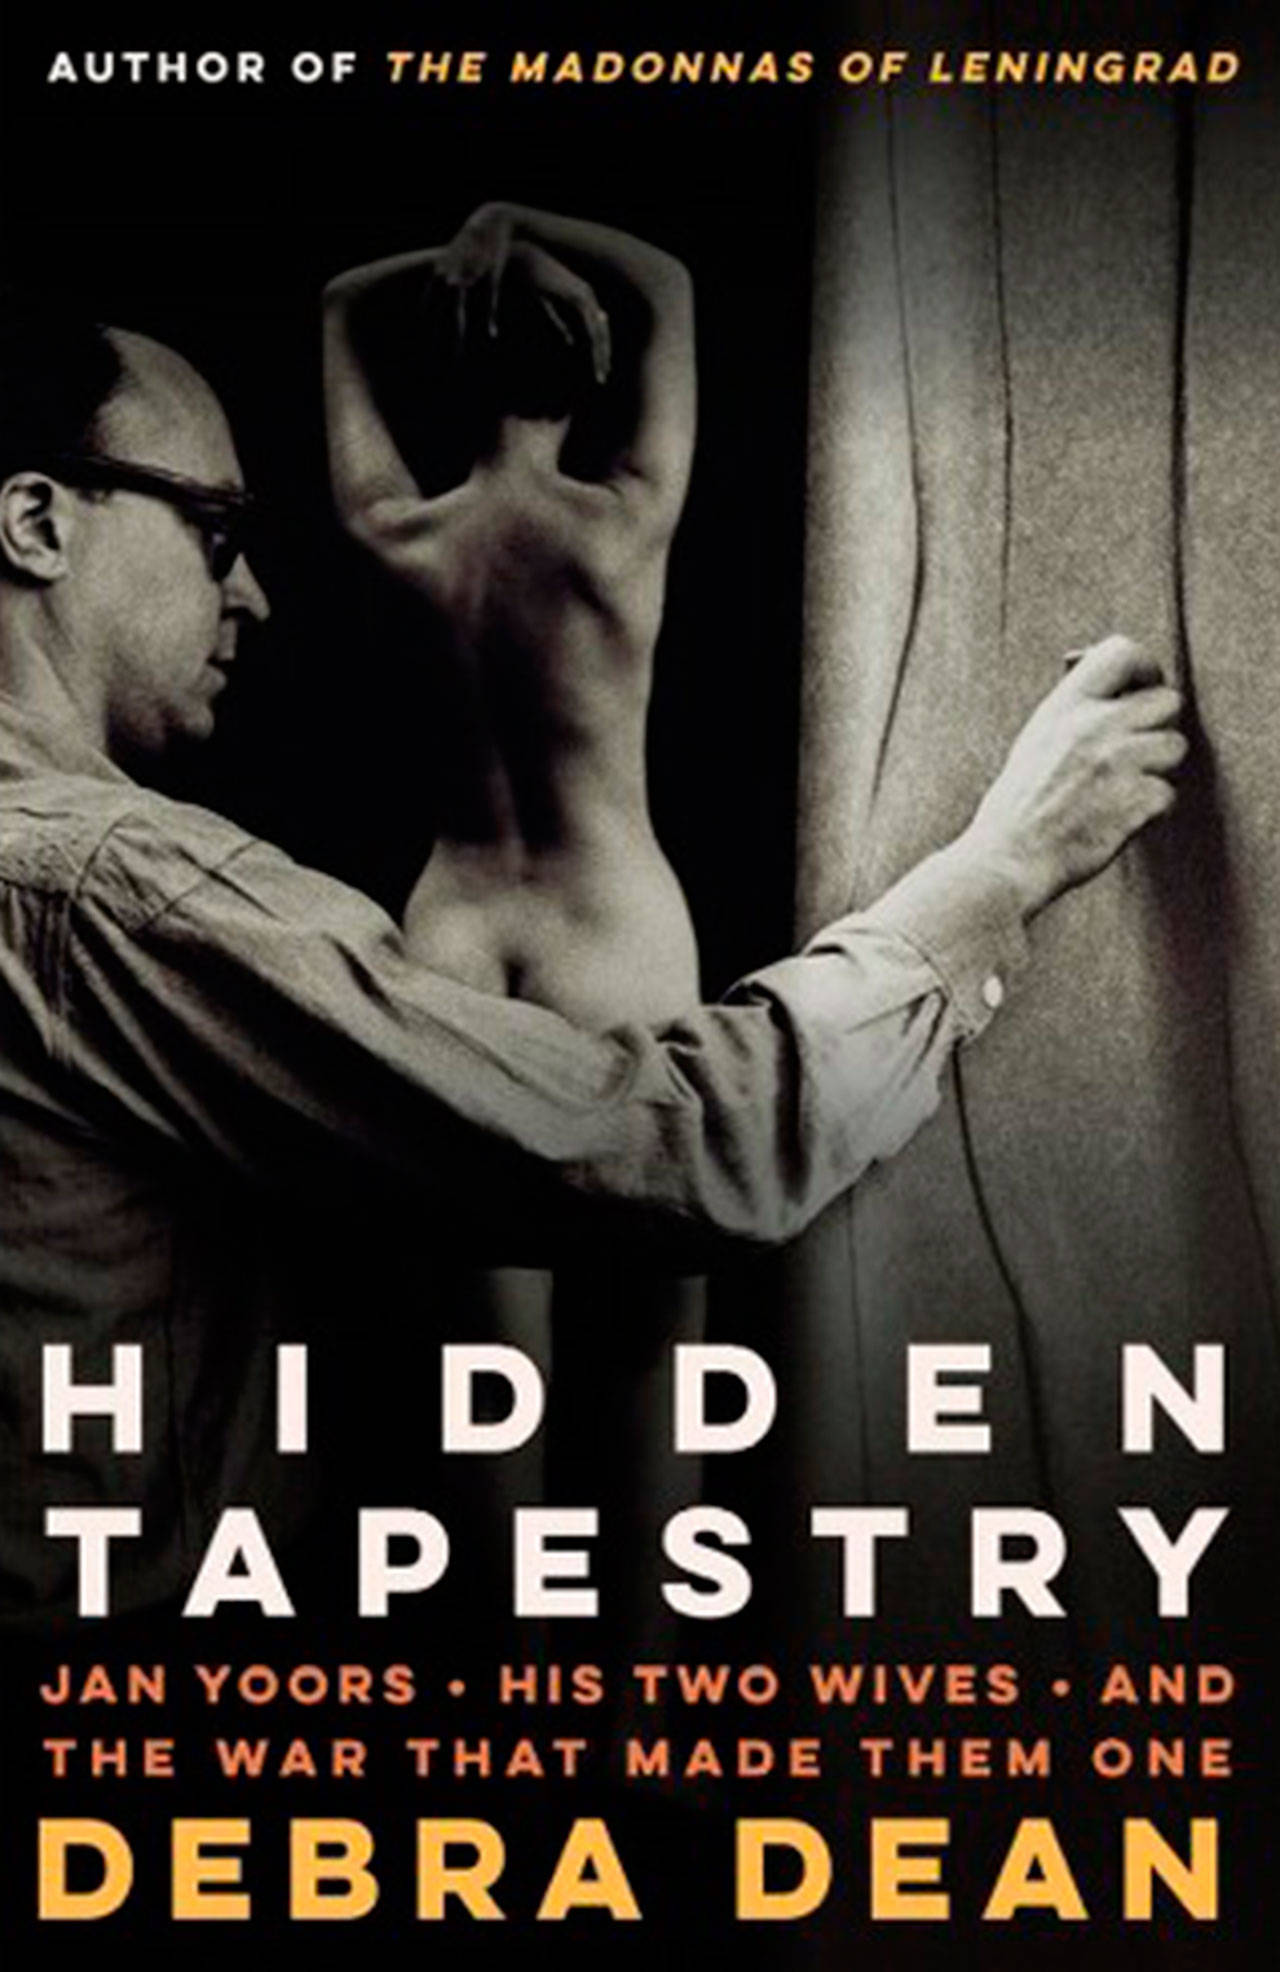 Image courtesy of Eagle Harbor Book Company | Author Debra Dean will talk about her new biography, “Hidden Tapestry: Jan Yoors, His Two Wives, and the War That Made Them One,” at Eagle Harbor Book Company at 6:30 p.m. Thursday, July 19.